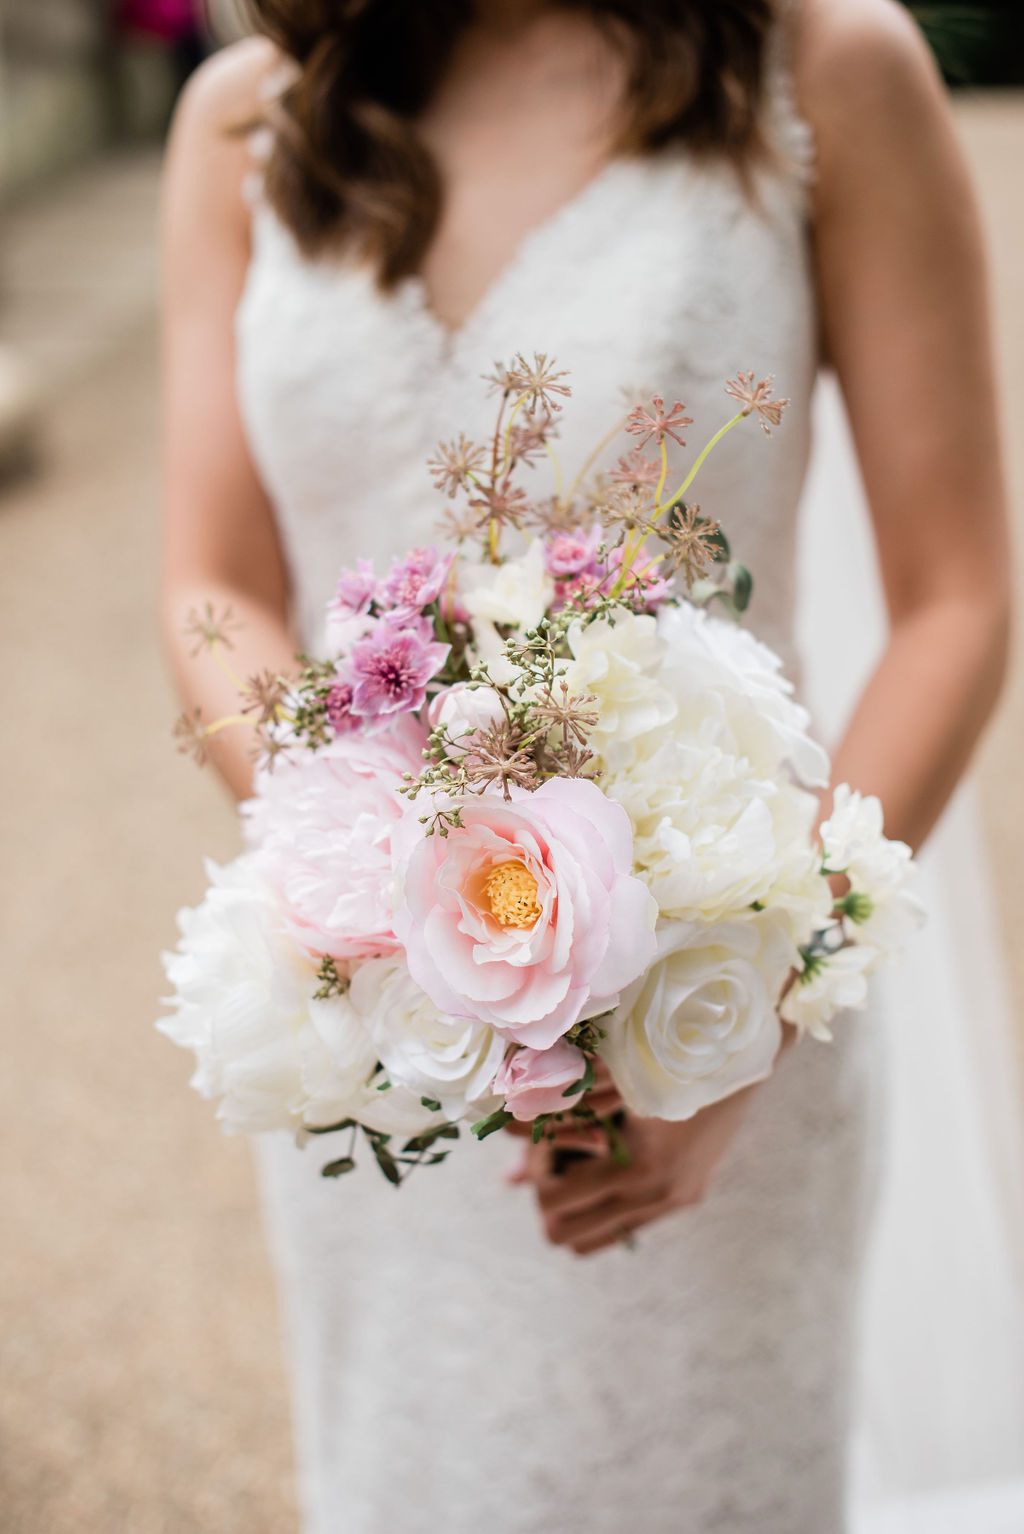 Summer bridal bouquet at Chiswick House, London